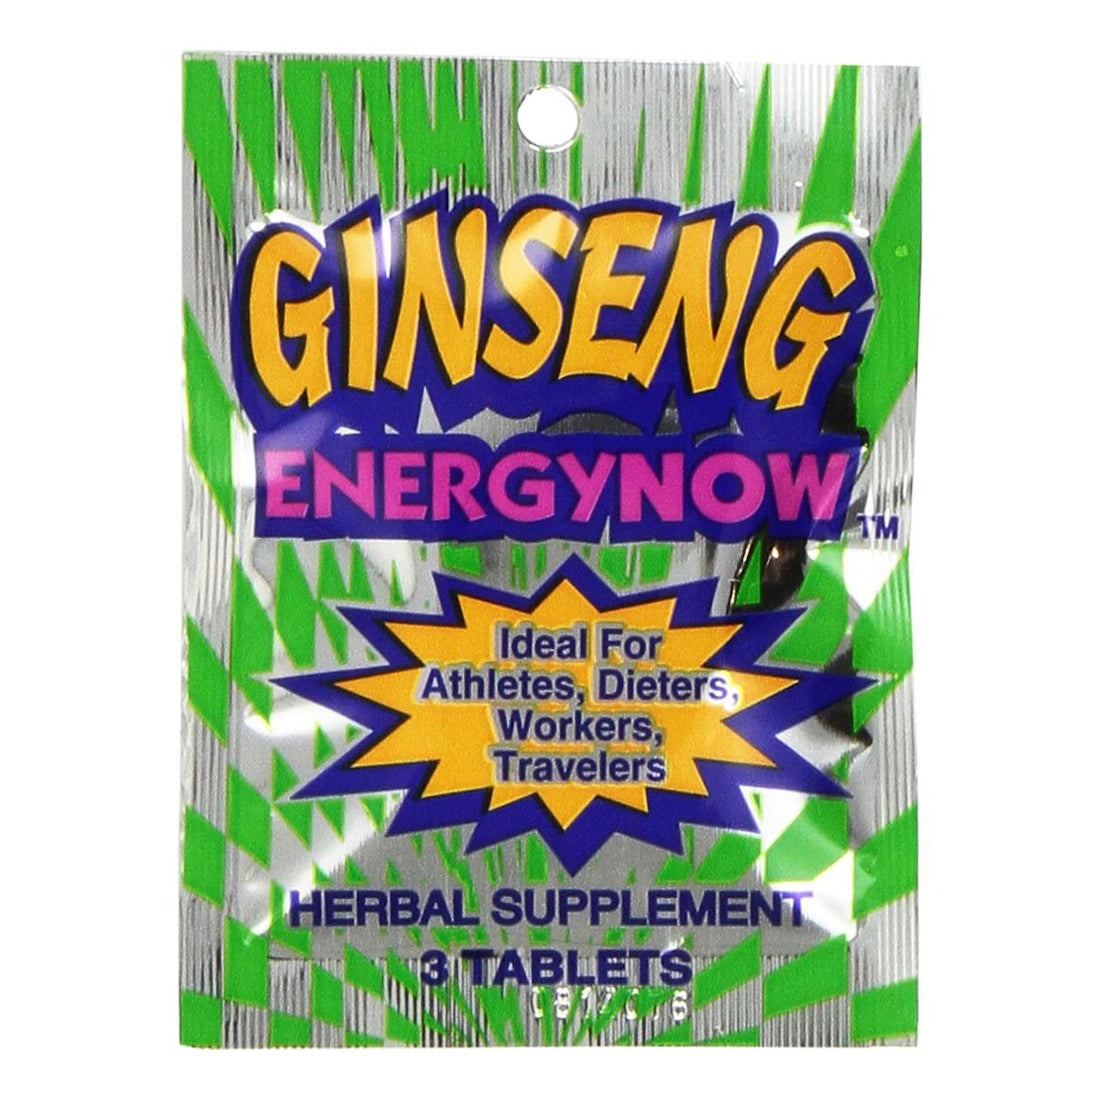 Ginseng Energy Now (3 pills) Ideal for Athletes, Workers, Dieters, Travelers